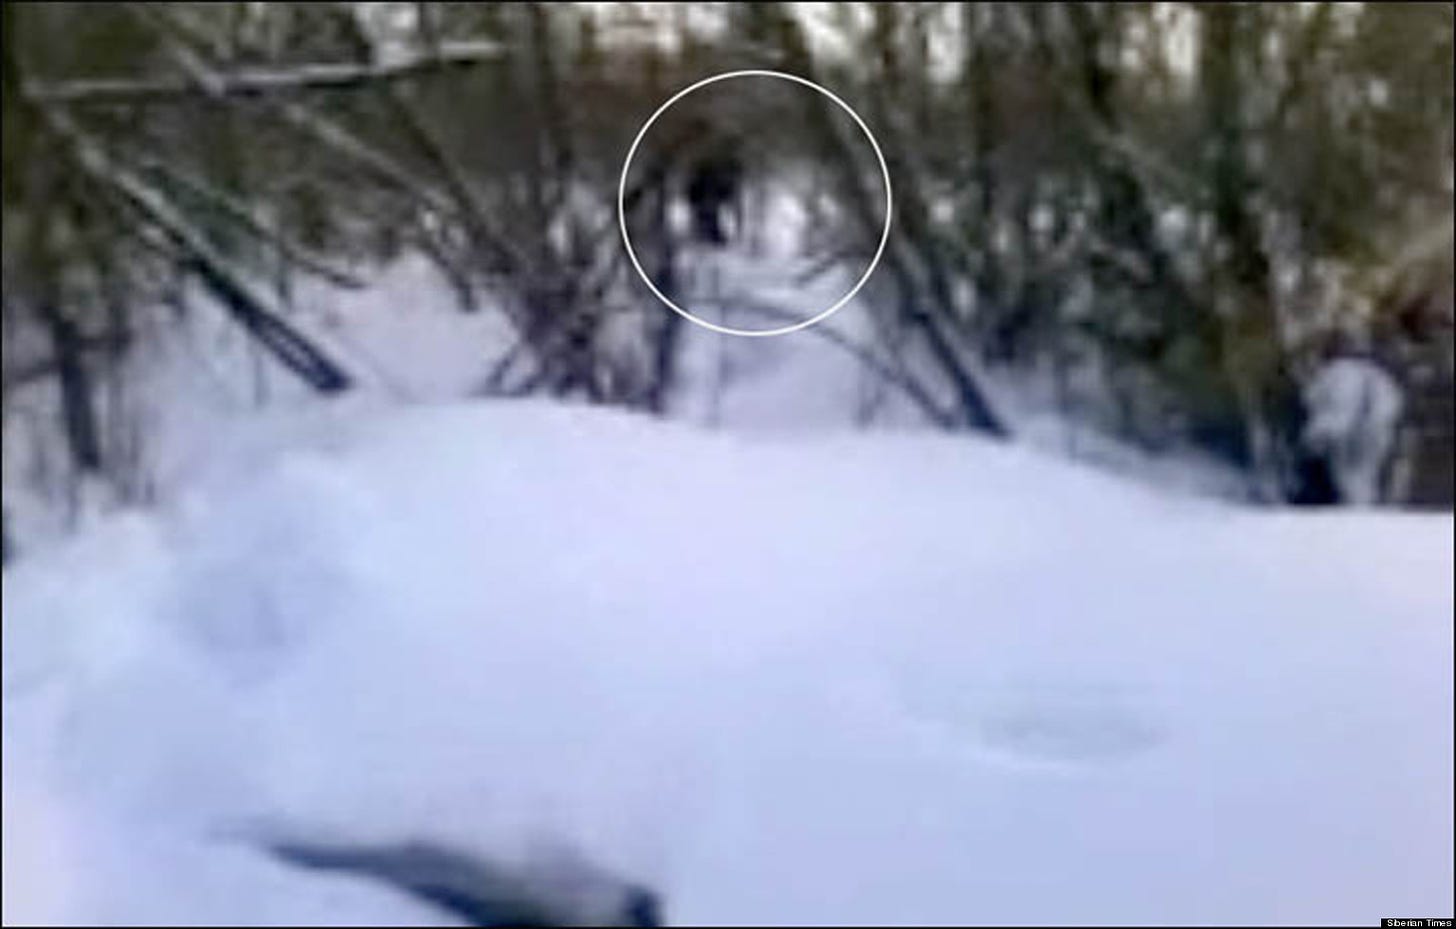 Yeti & Baby Footage In Siberia Is Real, Says Abominable Snowman ...